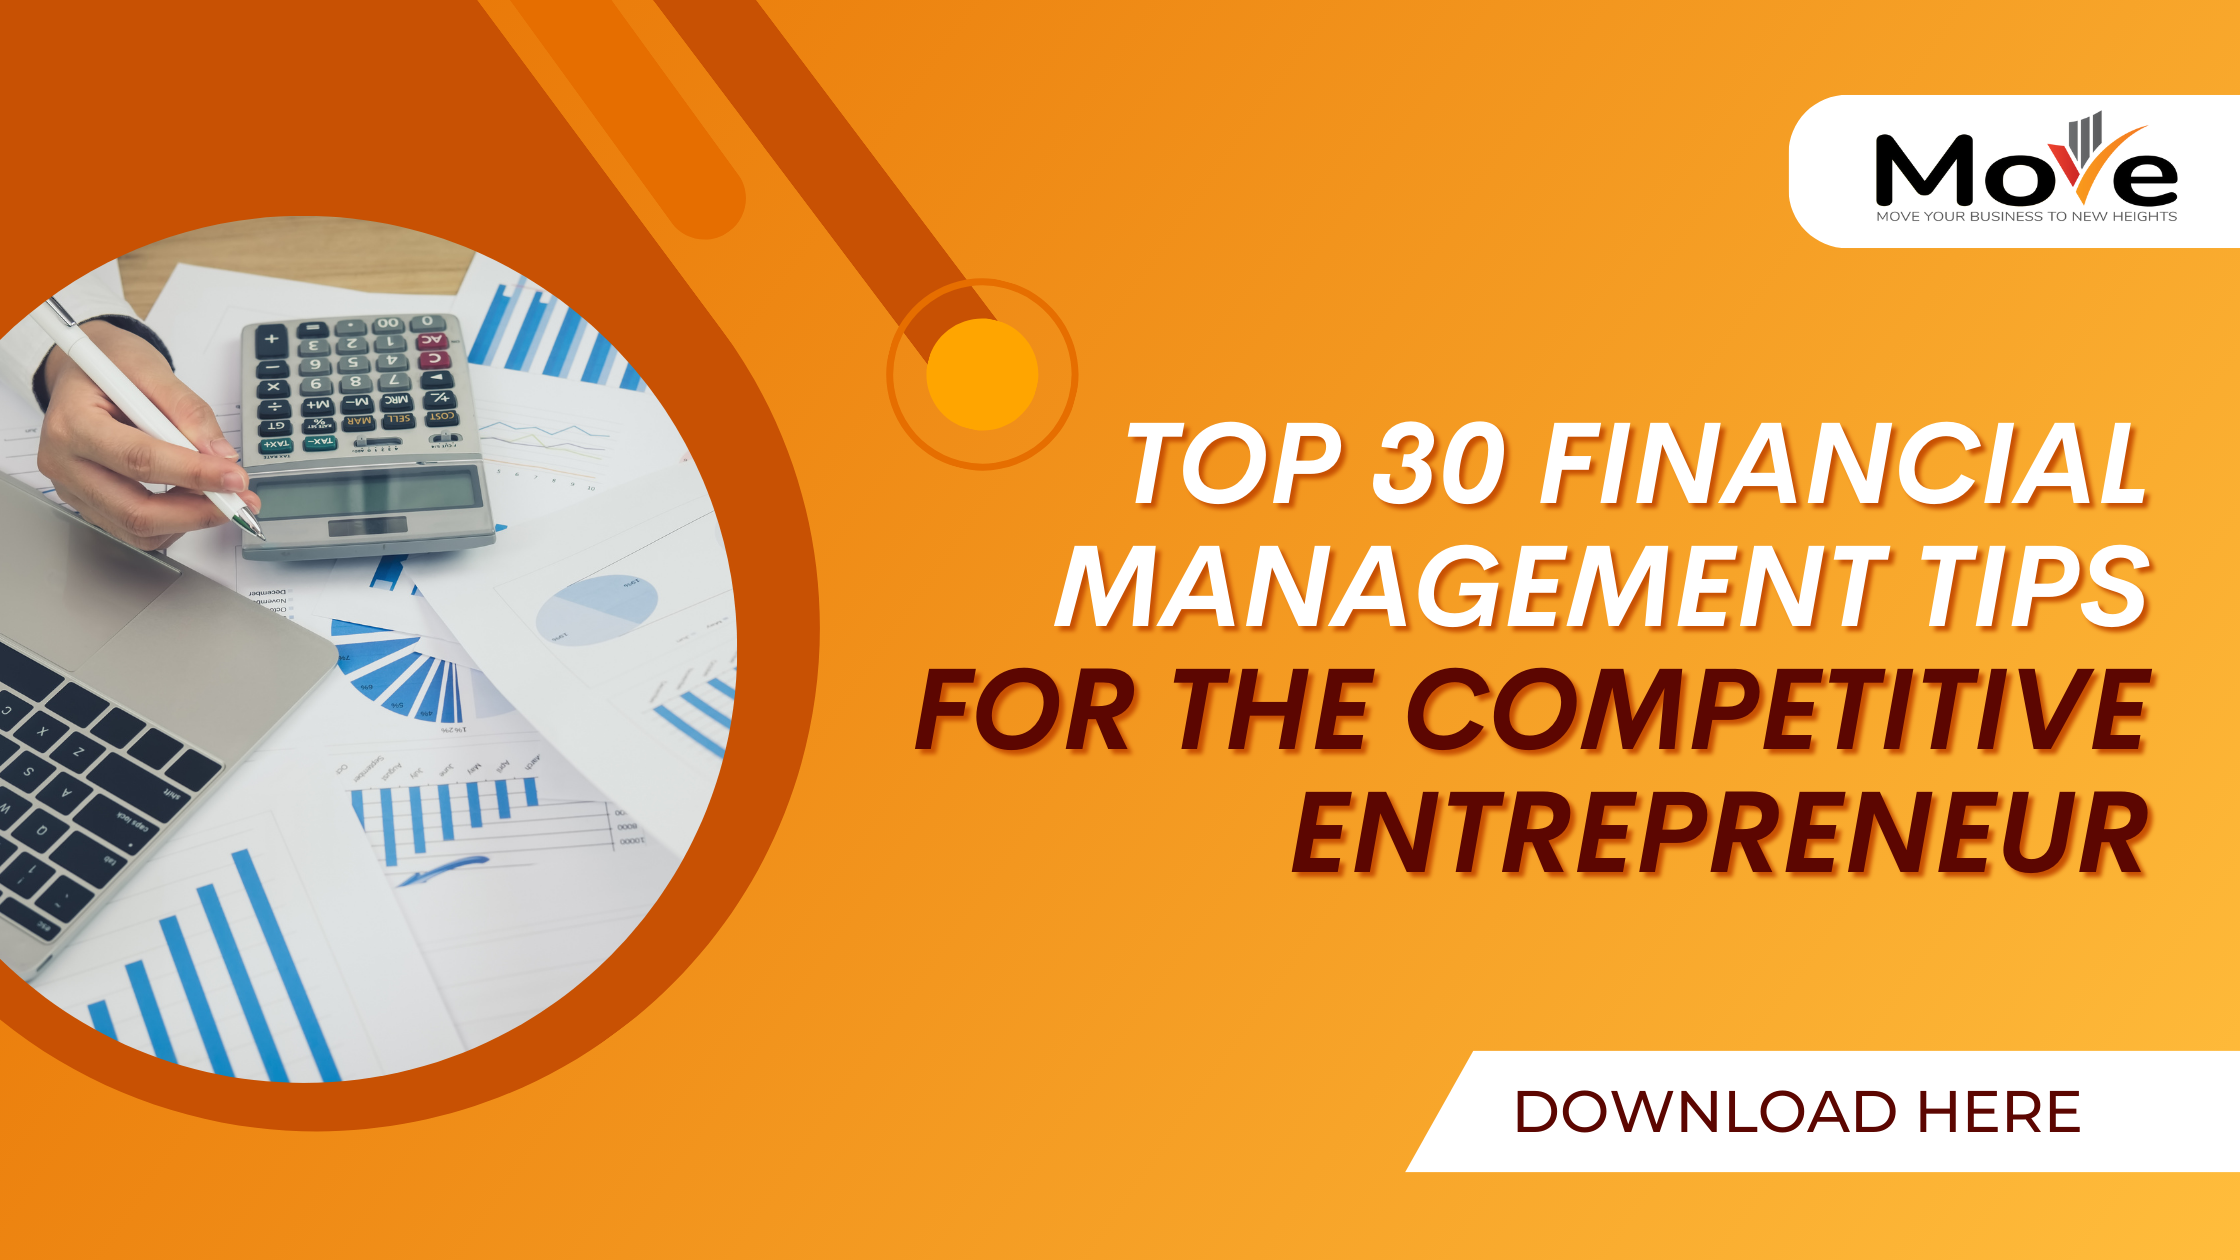 Top 30 Financial Management Tips for the Competitive Entrepreneur